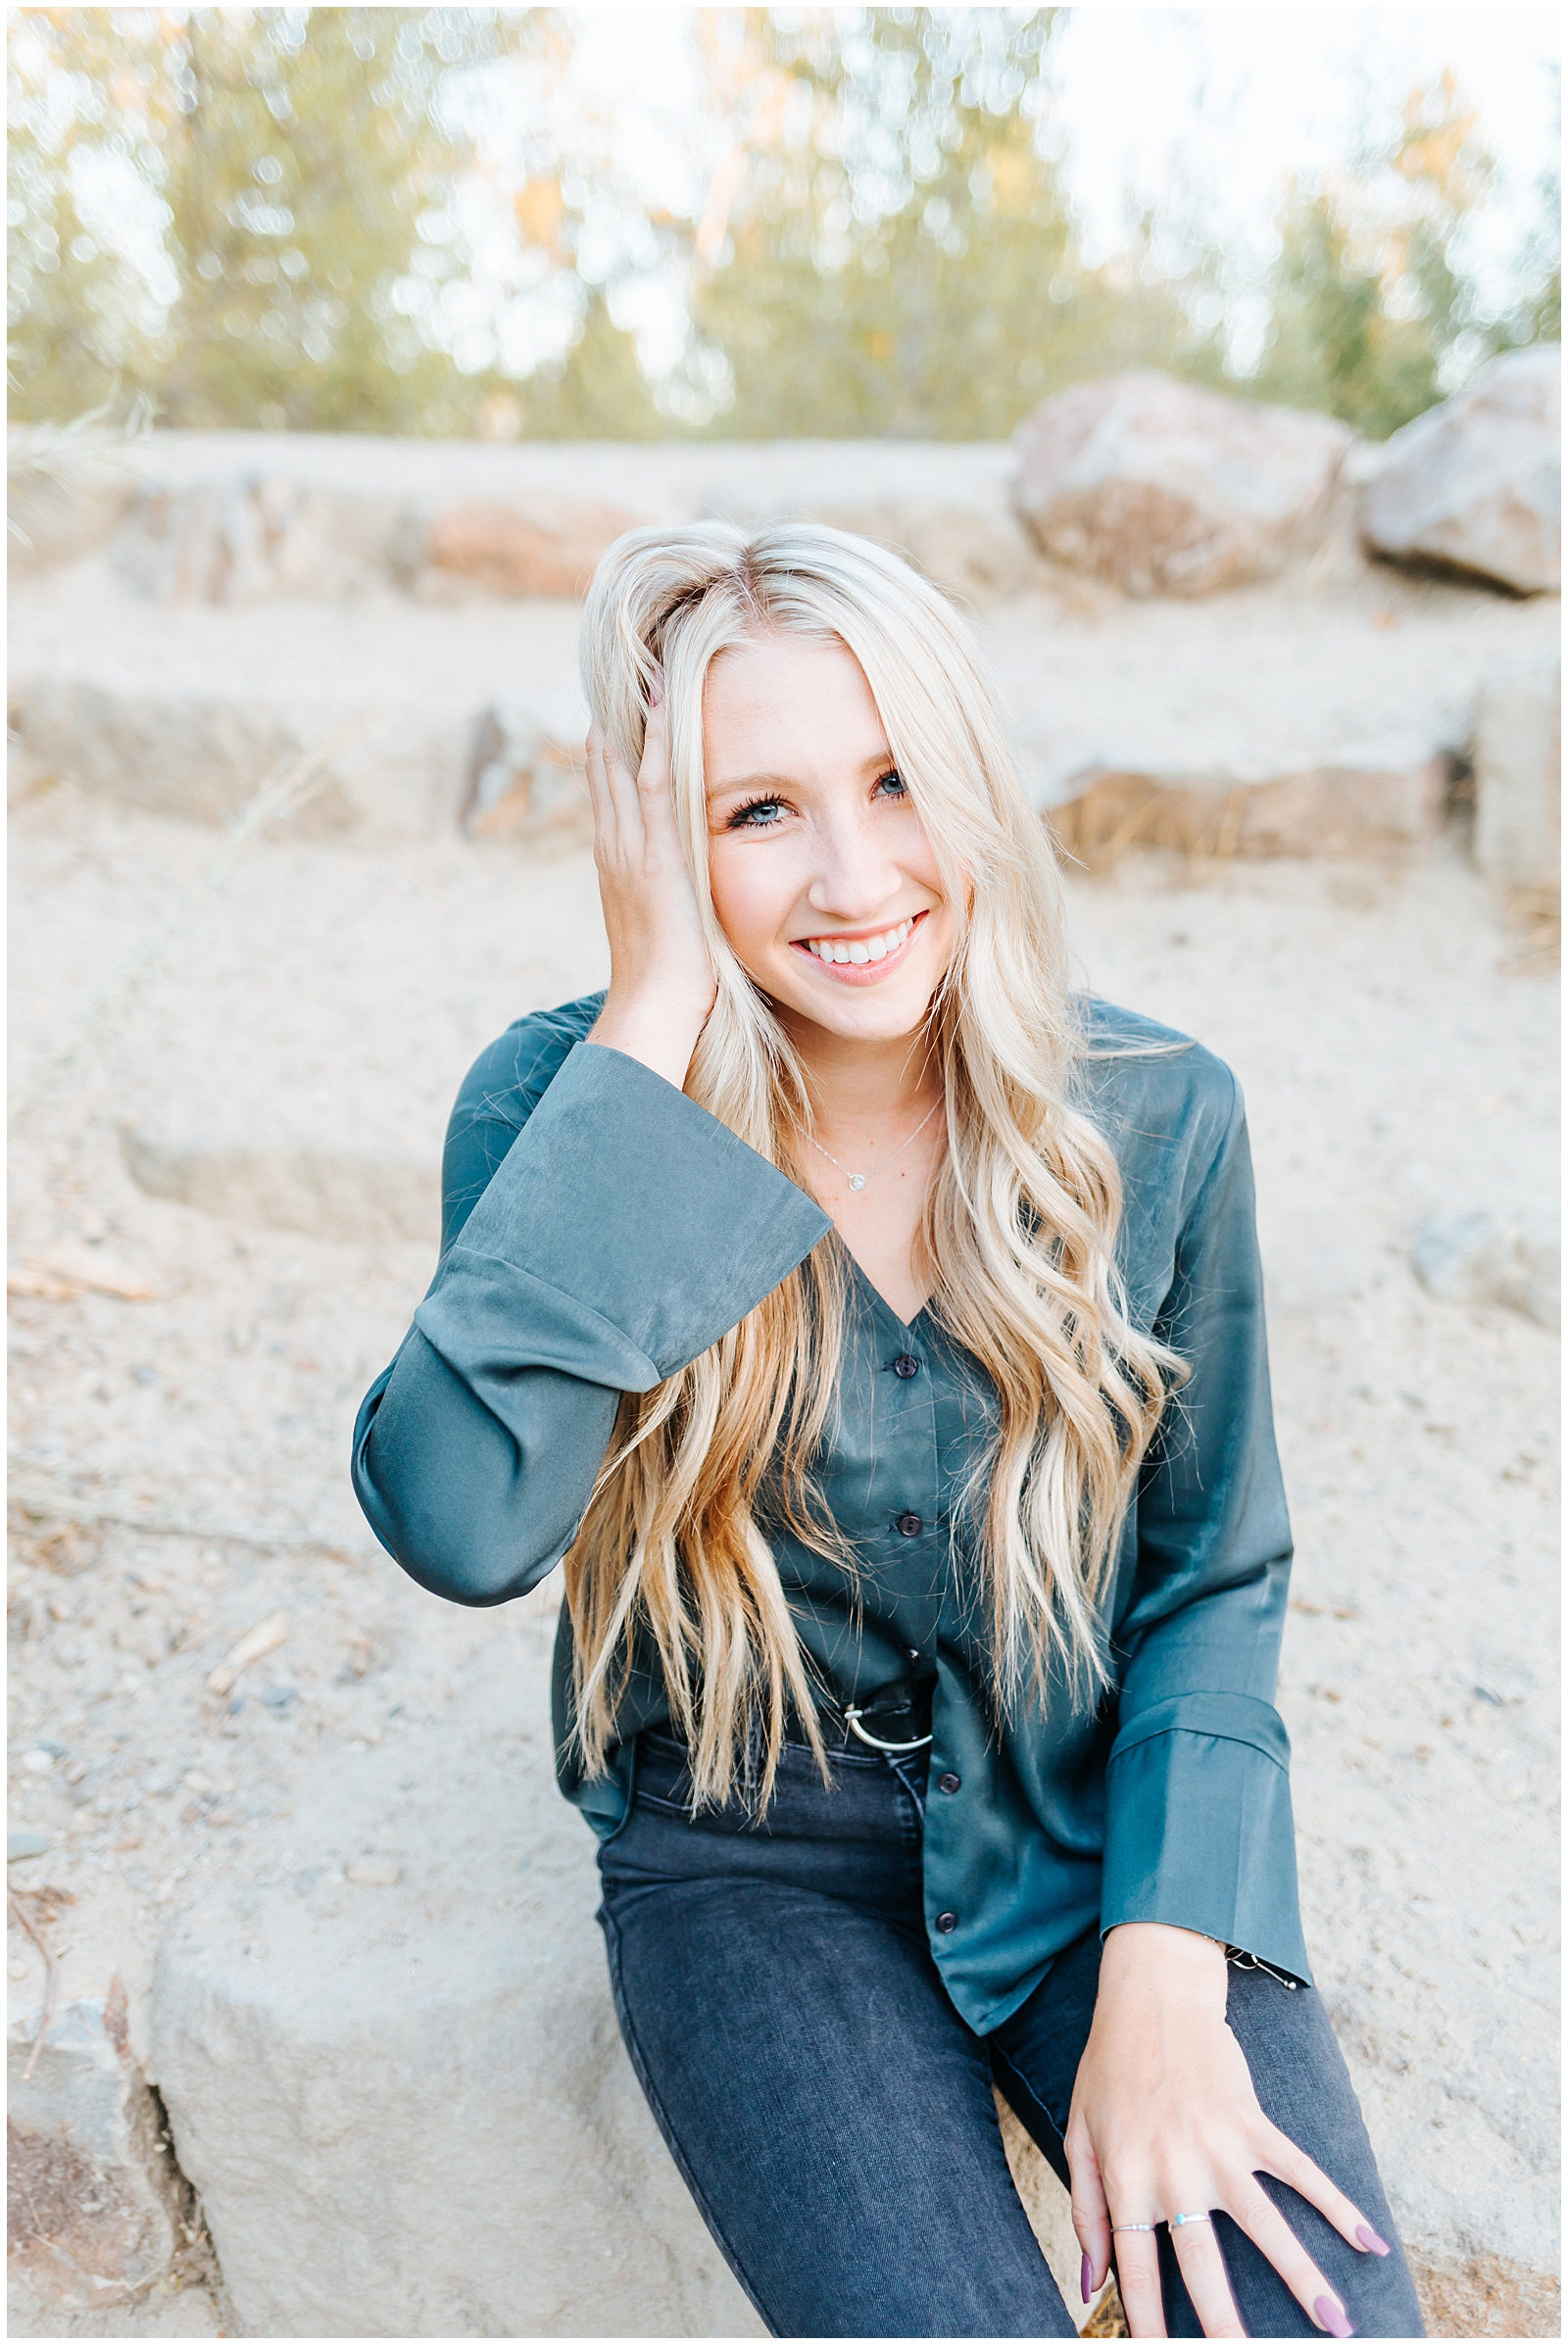 Dreamy Senior Session by the Boise River in Green Silk Shirt